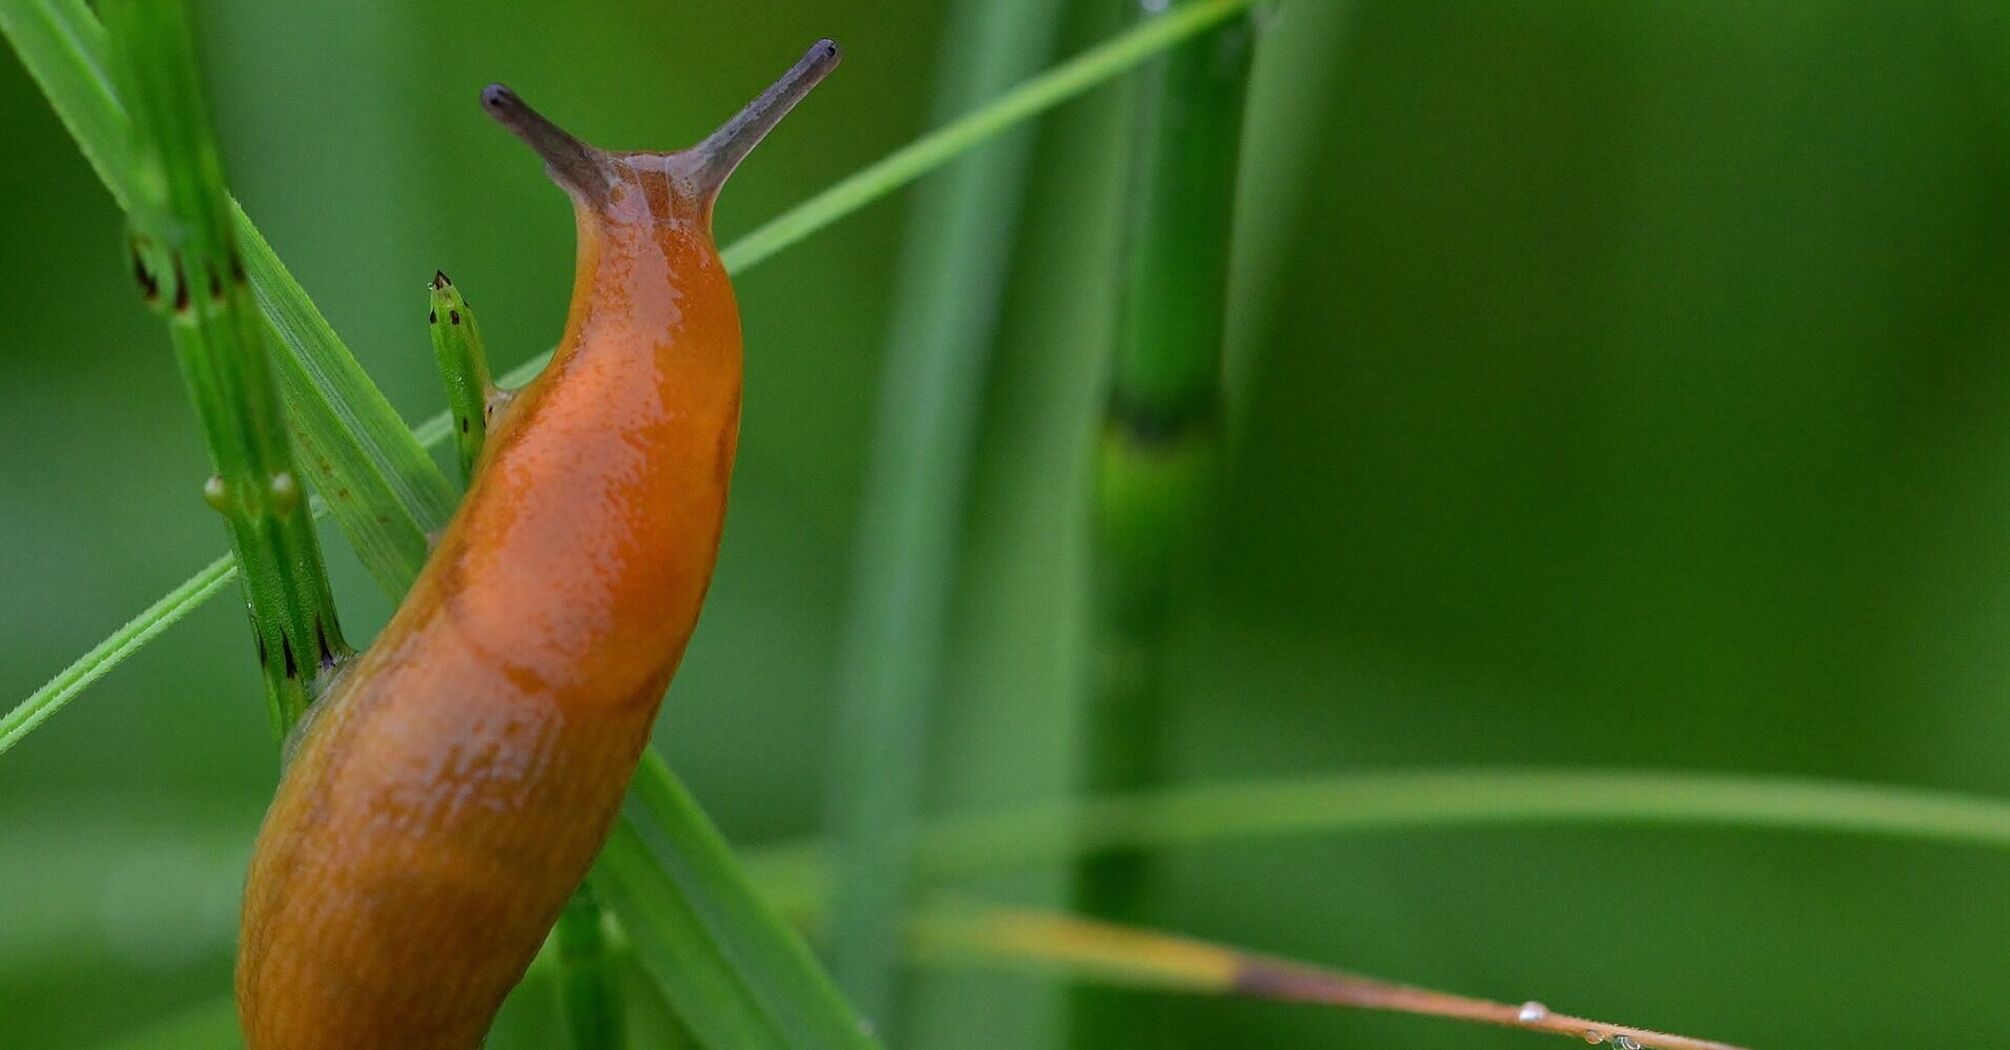 How to protect the garden from slugs: an easy way